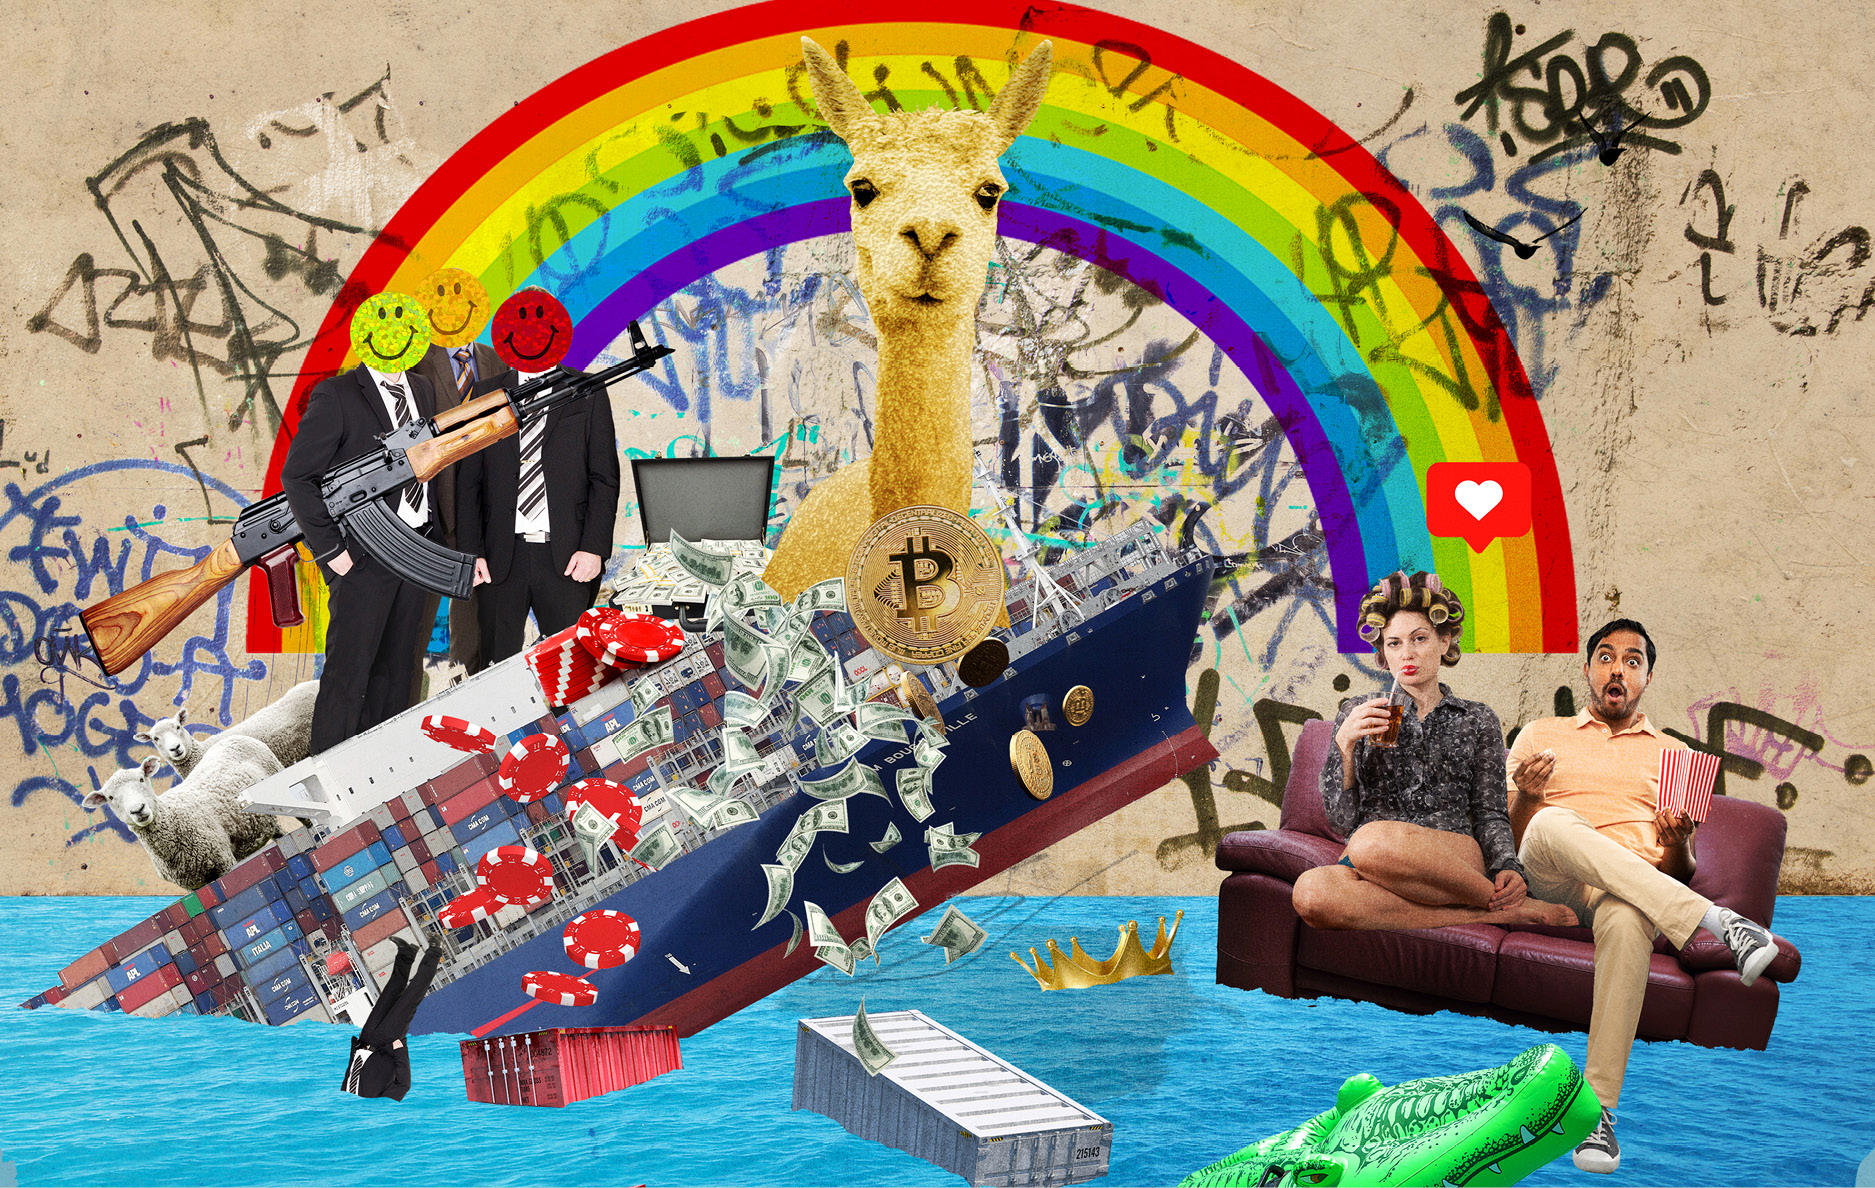 Collage of many images including a llama, a rainbow, graffiti, a sinking cargo ship, a floating sofa with a man and a woman sitting on it, money, an inflatable crocodile, sheep, three men in suits with a gun and smiley face stickers over their heads